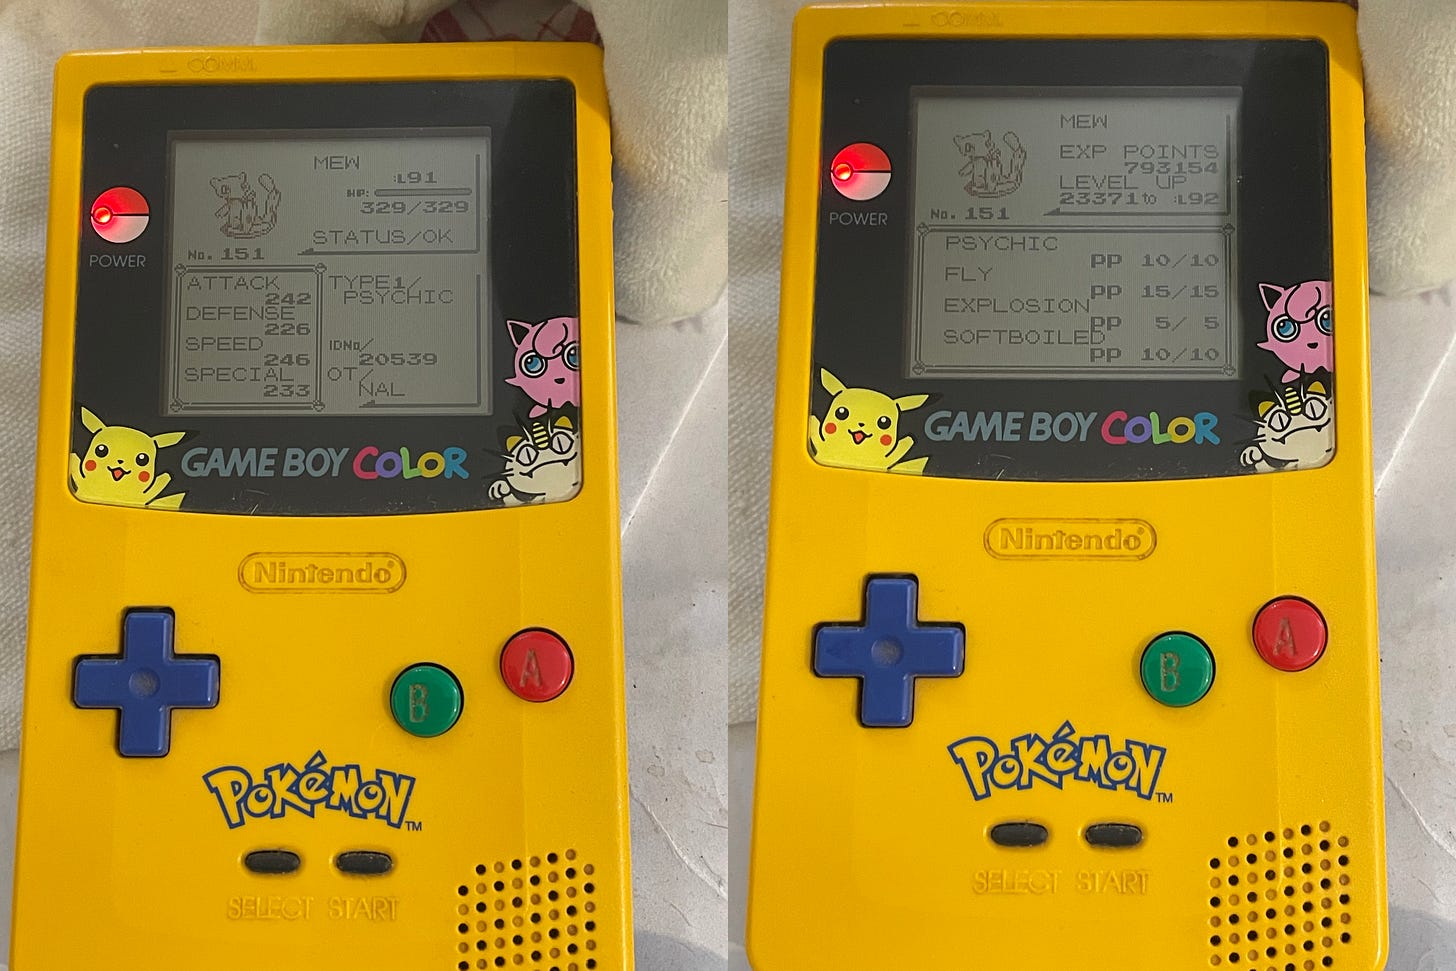 The PokéTour Mew that was sent to Tony's copy of Pokémon Yellow back in 1999